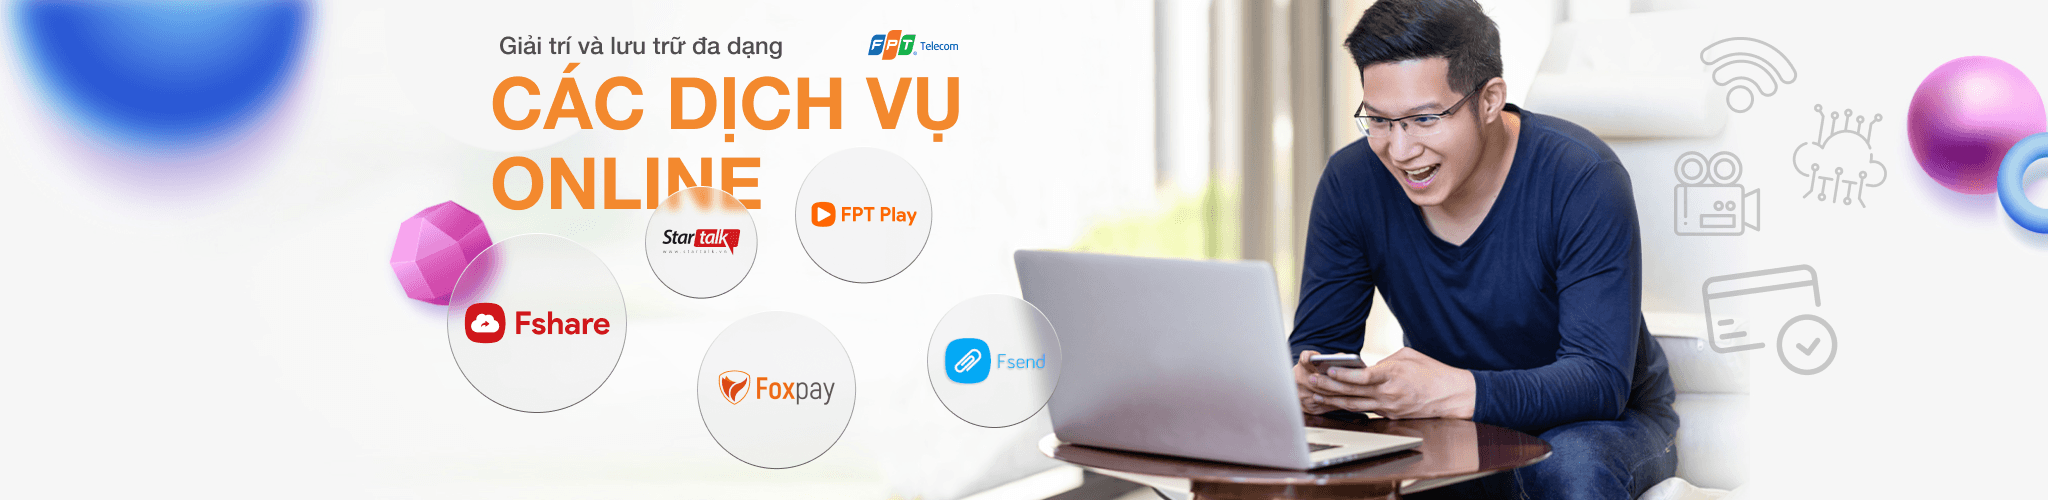 banner dịch vụ fpt online